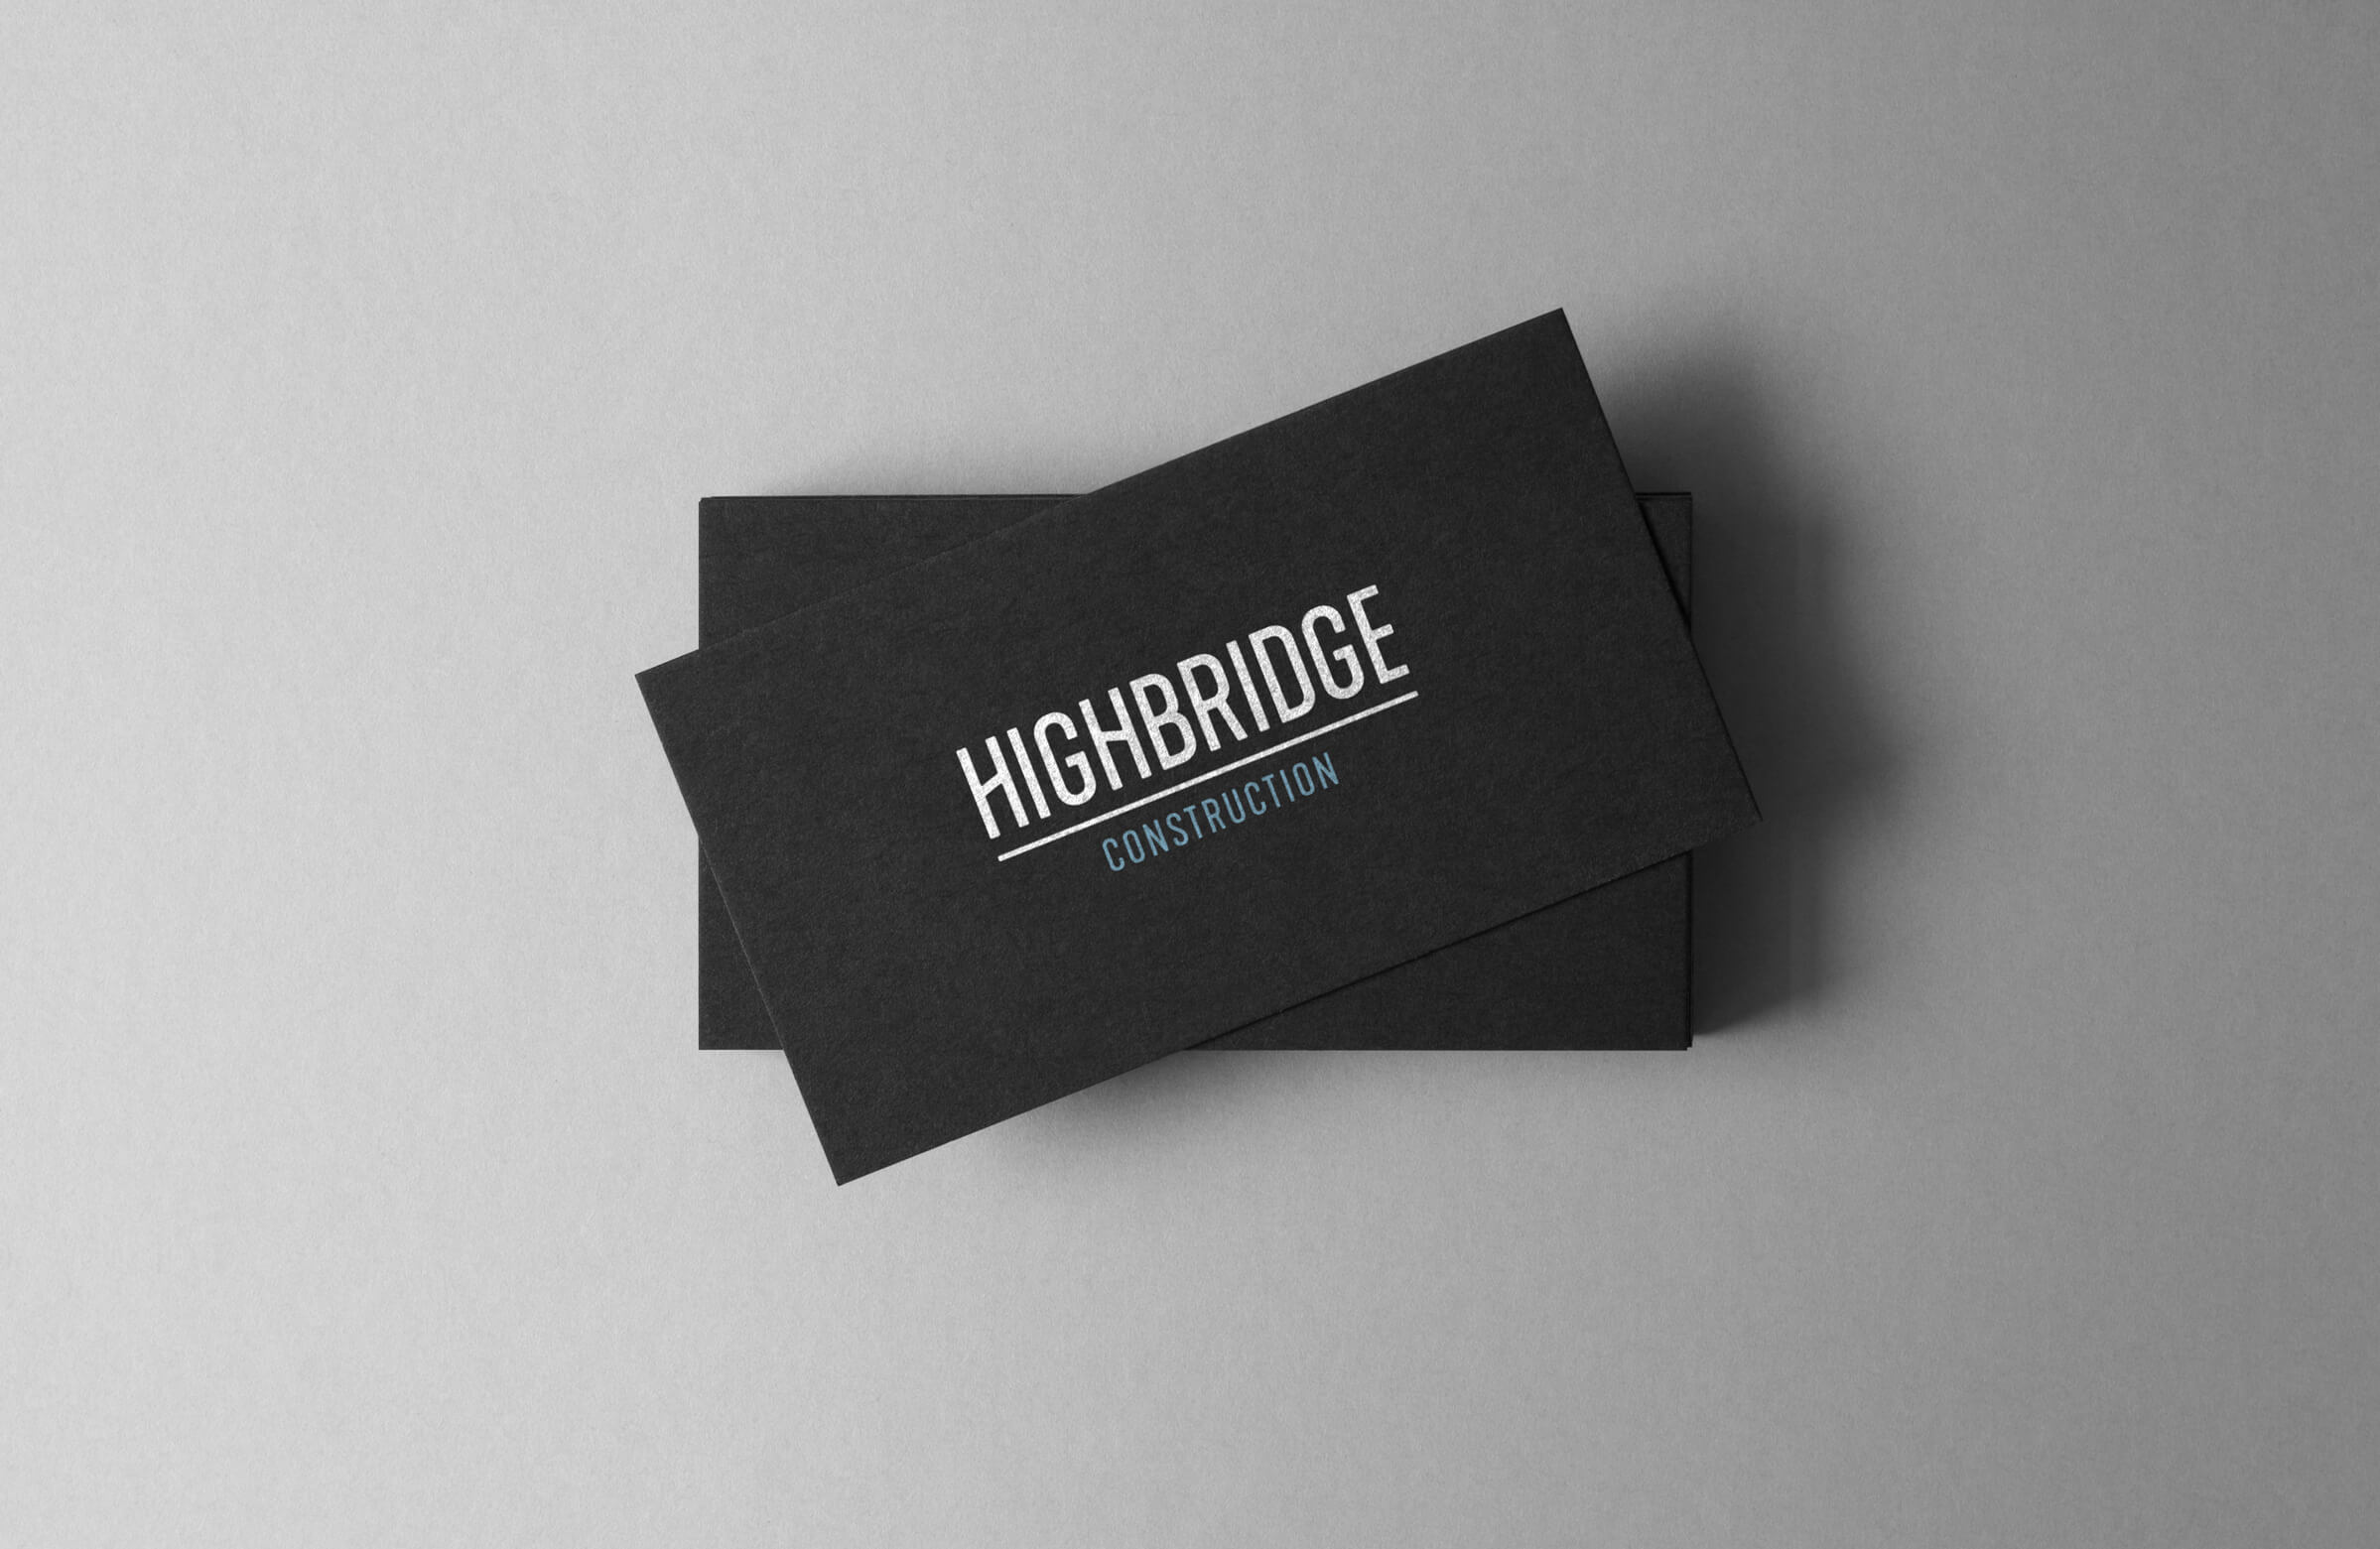 Highbridge Construction business cards for Ottawa-based general contractor by graphic designer idApostle